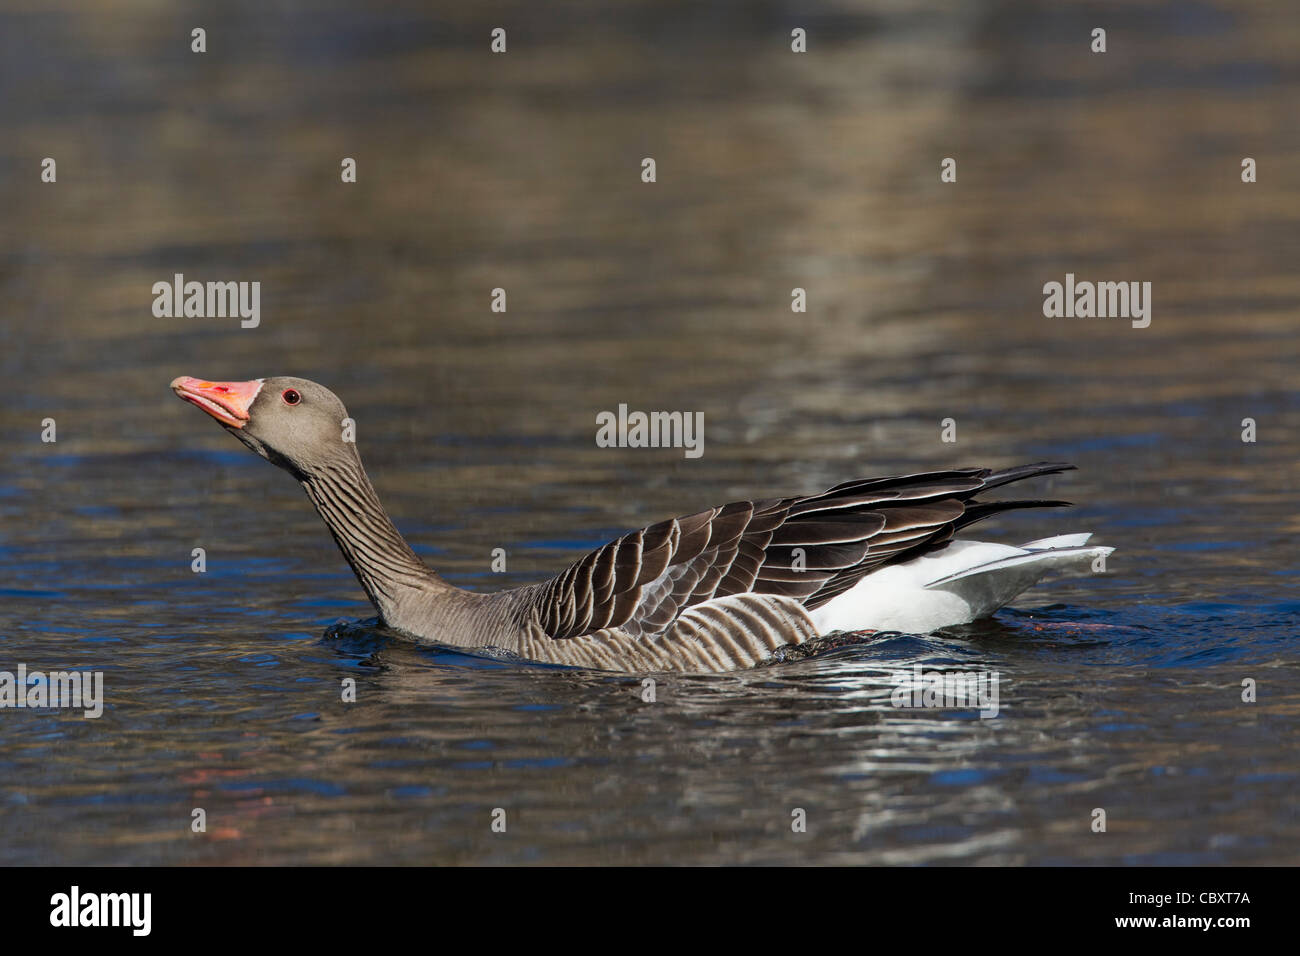 Greylag goose / graylag goose (Anser anser) showing aggressive display, Germany Stock Photo